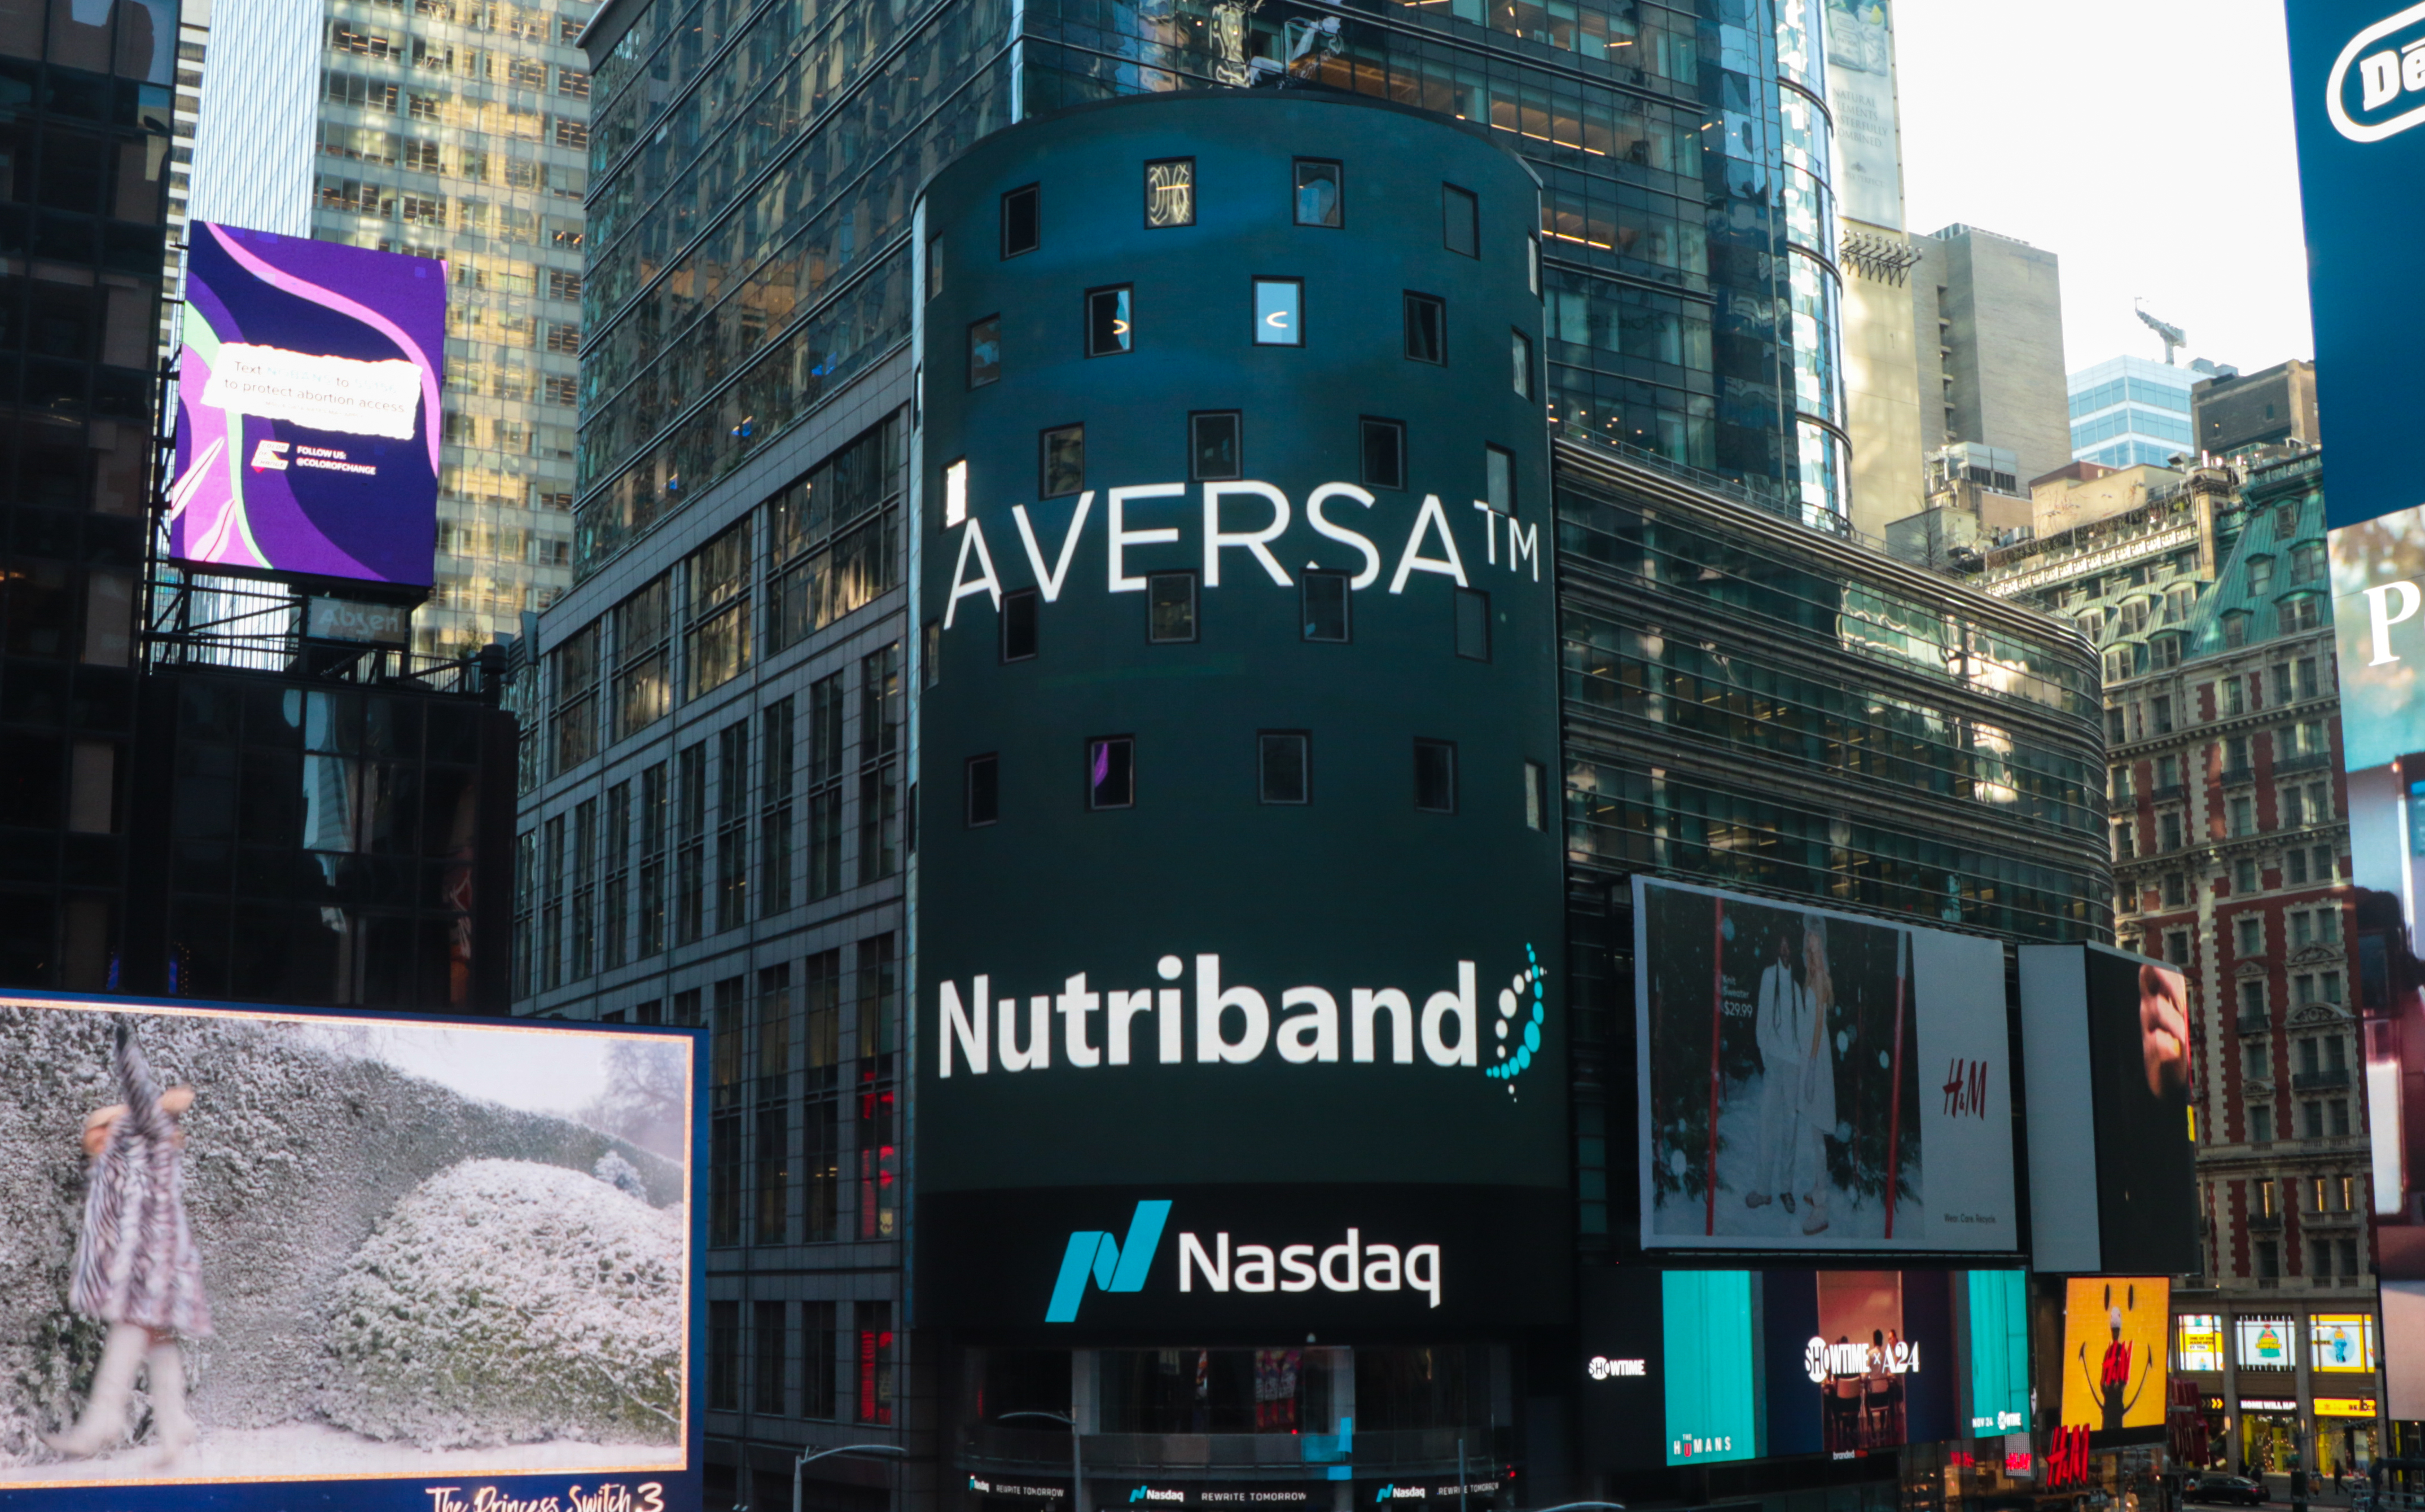 Nutriband Inc., Tuesday, April 4, 2023, Press release picture